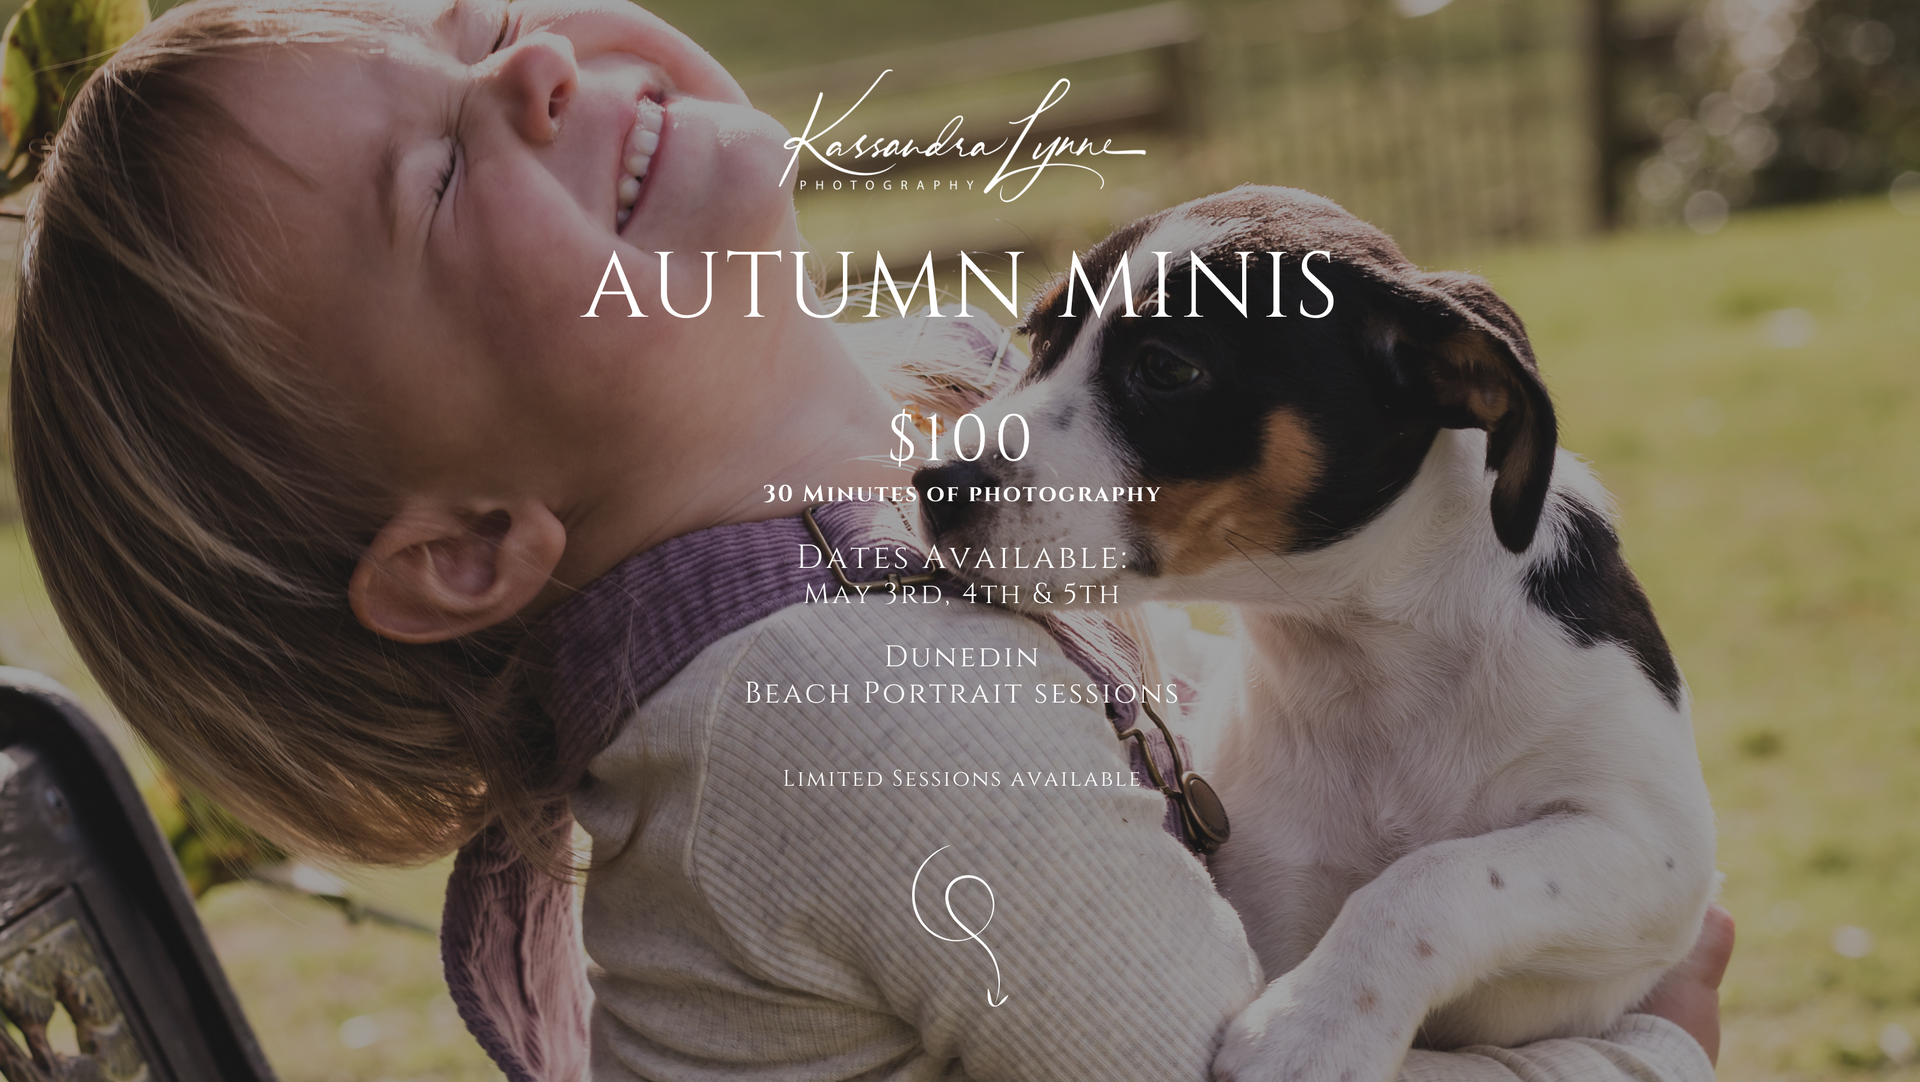 Autumn Minis - 30 Minutes of Photography + 20 High Res Images